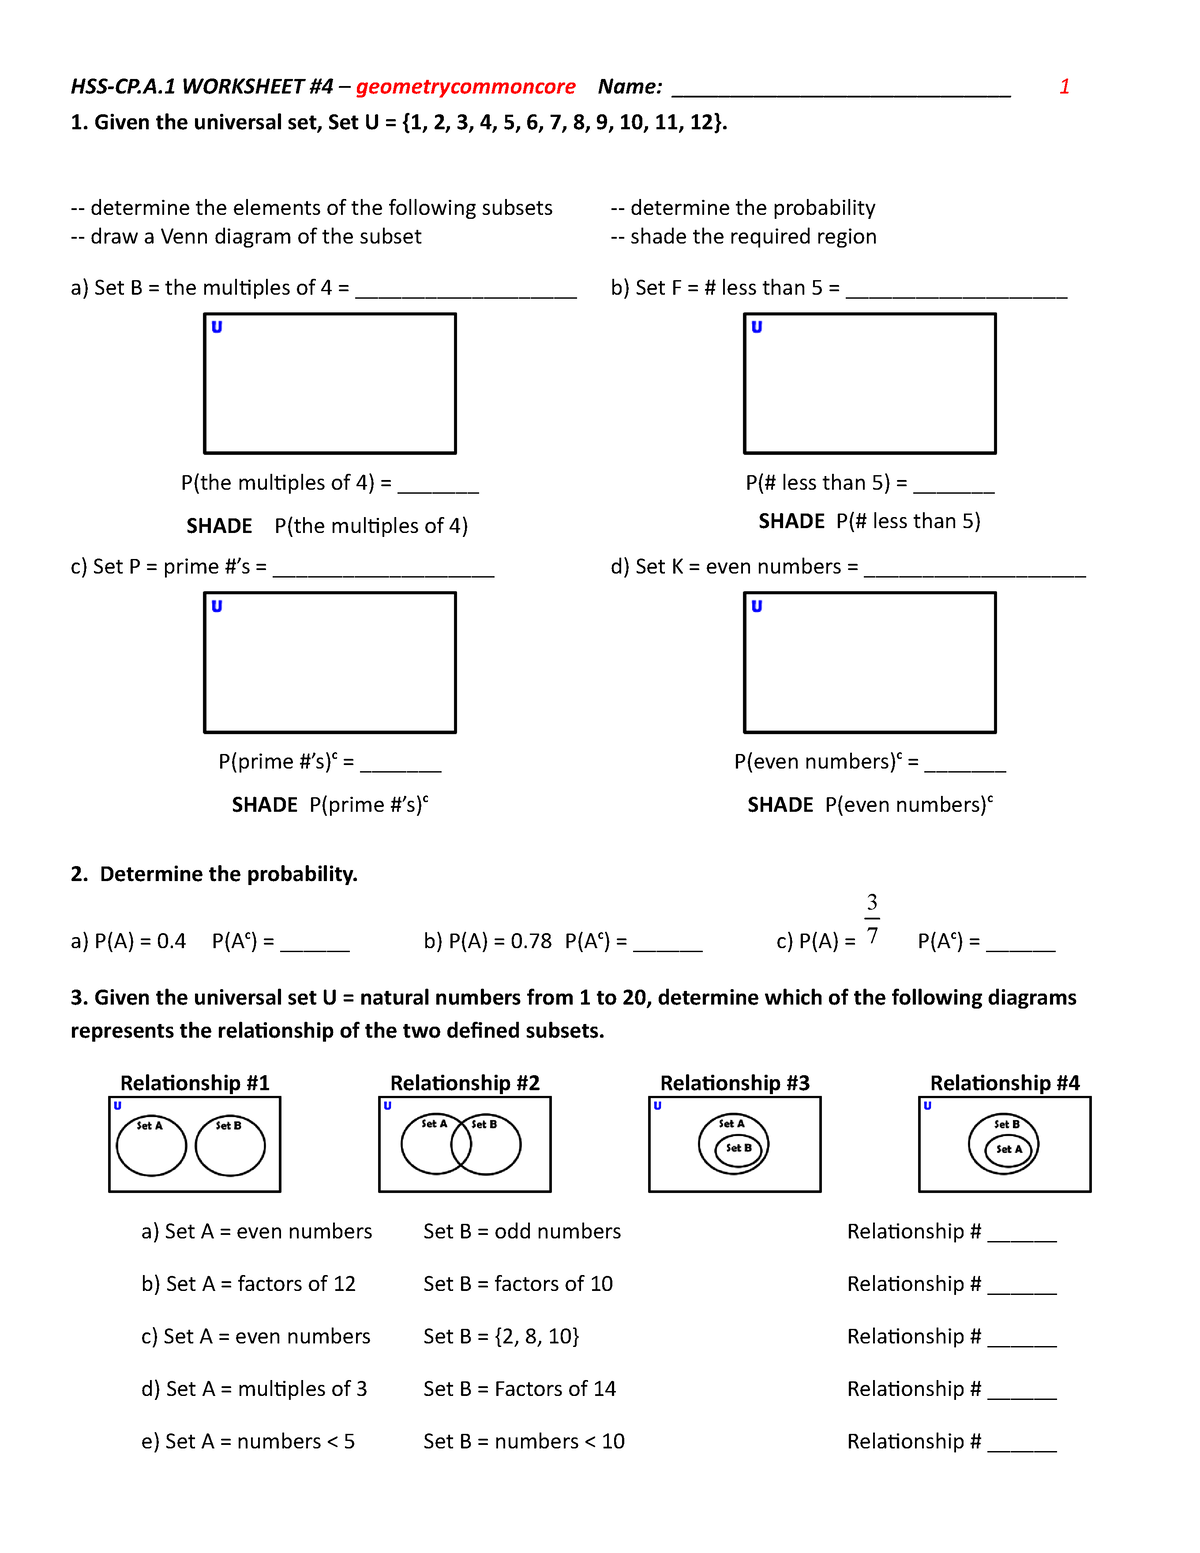 hss-cp-cp-a-1worksheet4-hss-cp-a-worksheet-4-geometrycommoncore